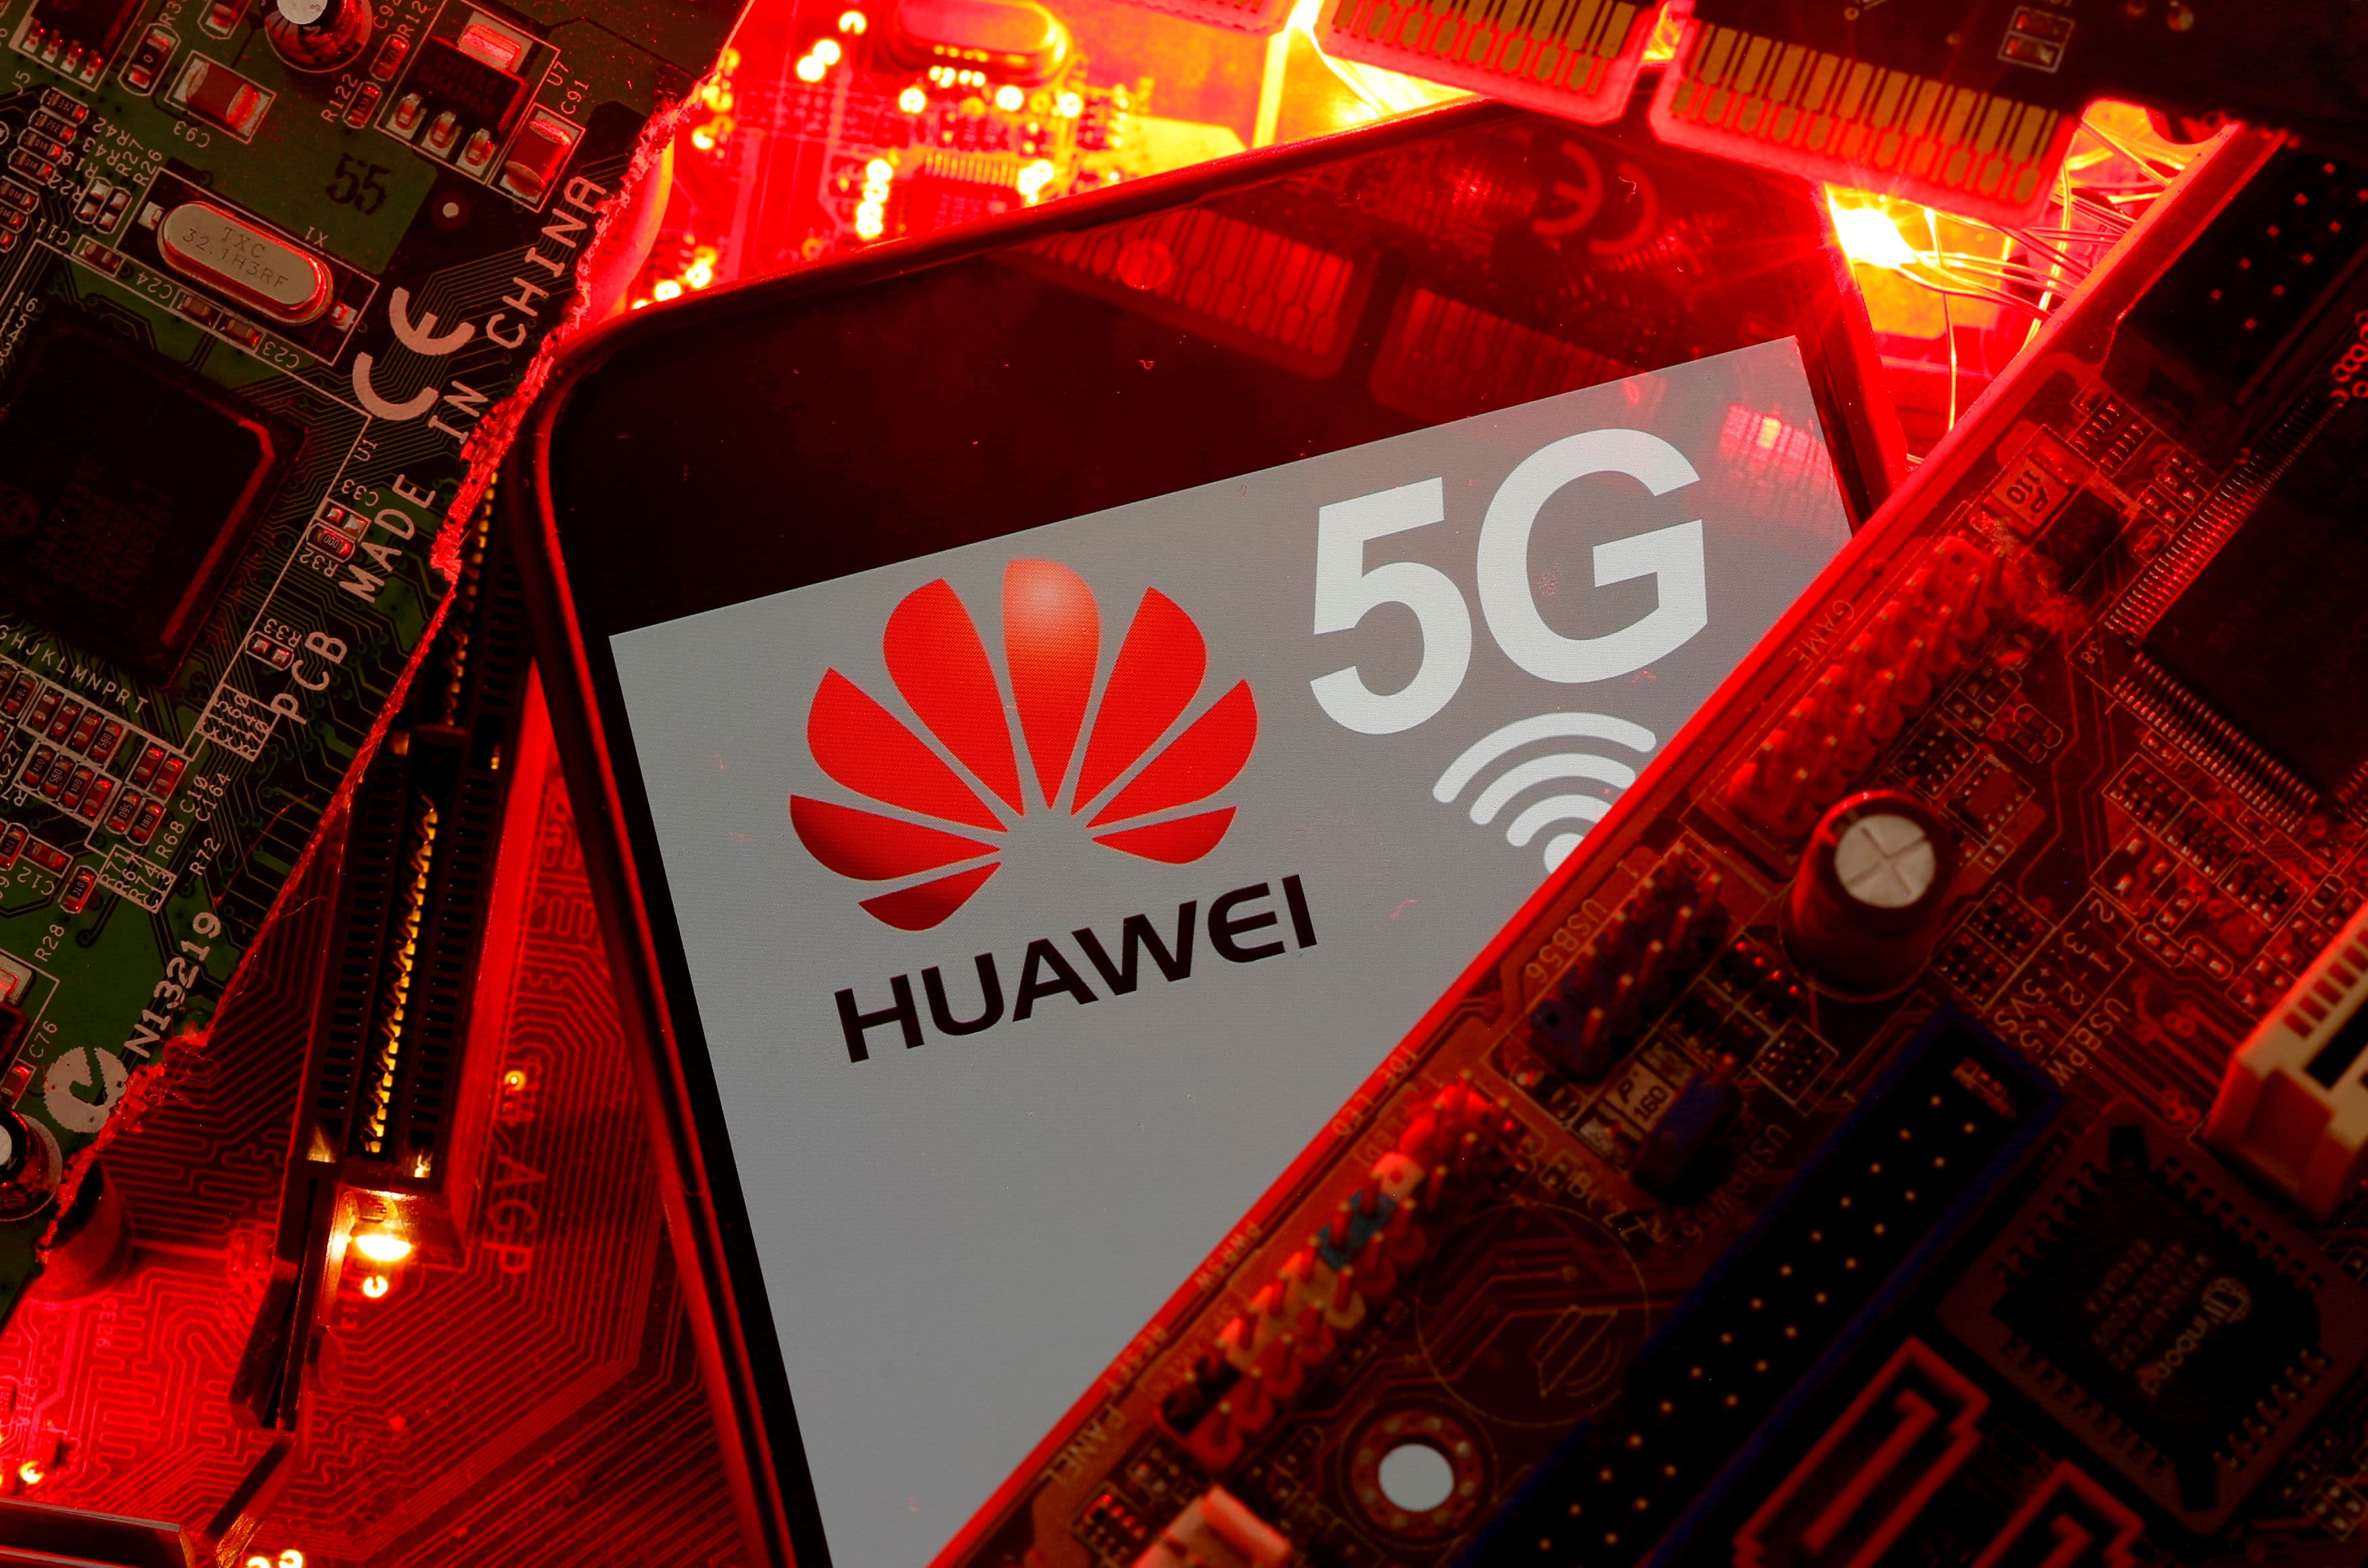 Huawei will charge royalties to smartphone makers using its 5G technology